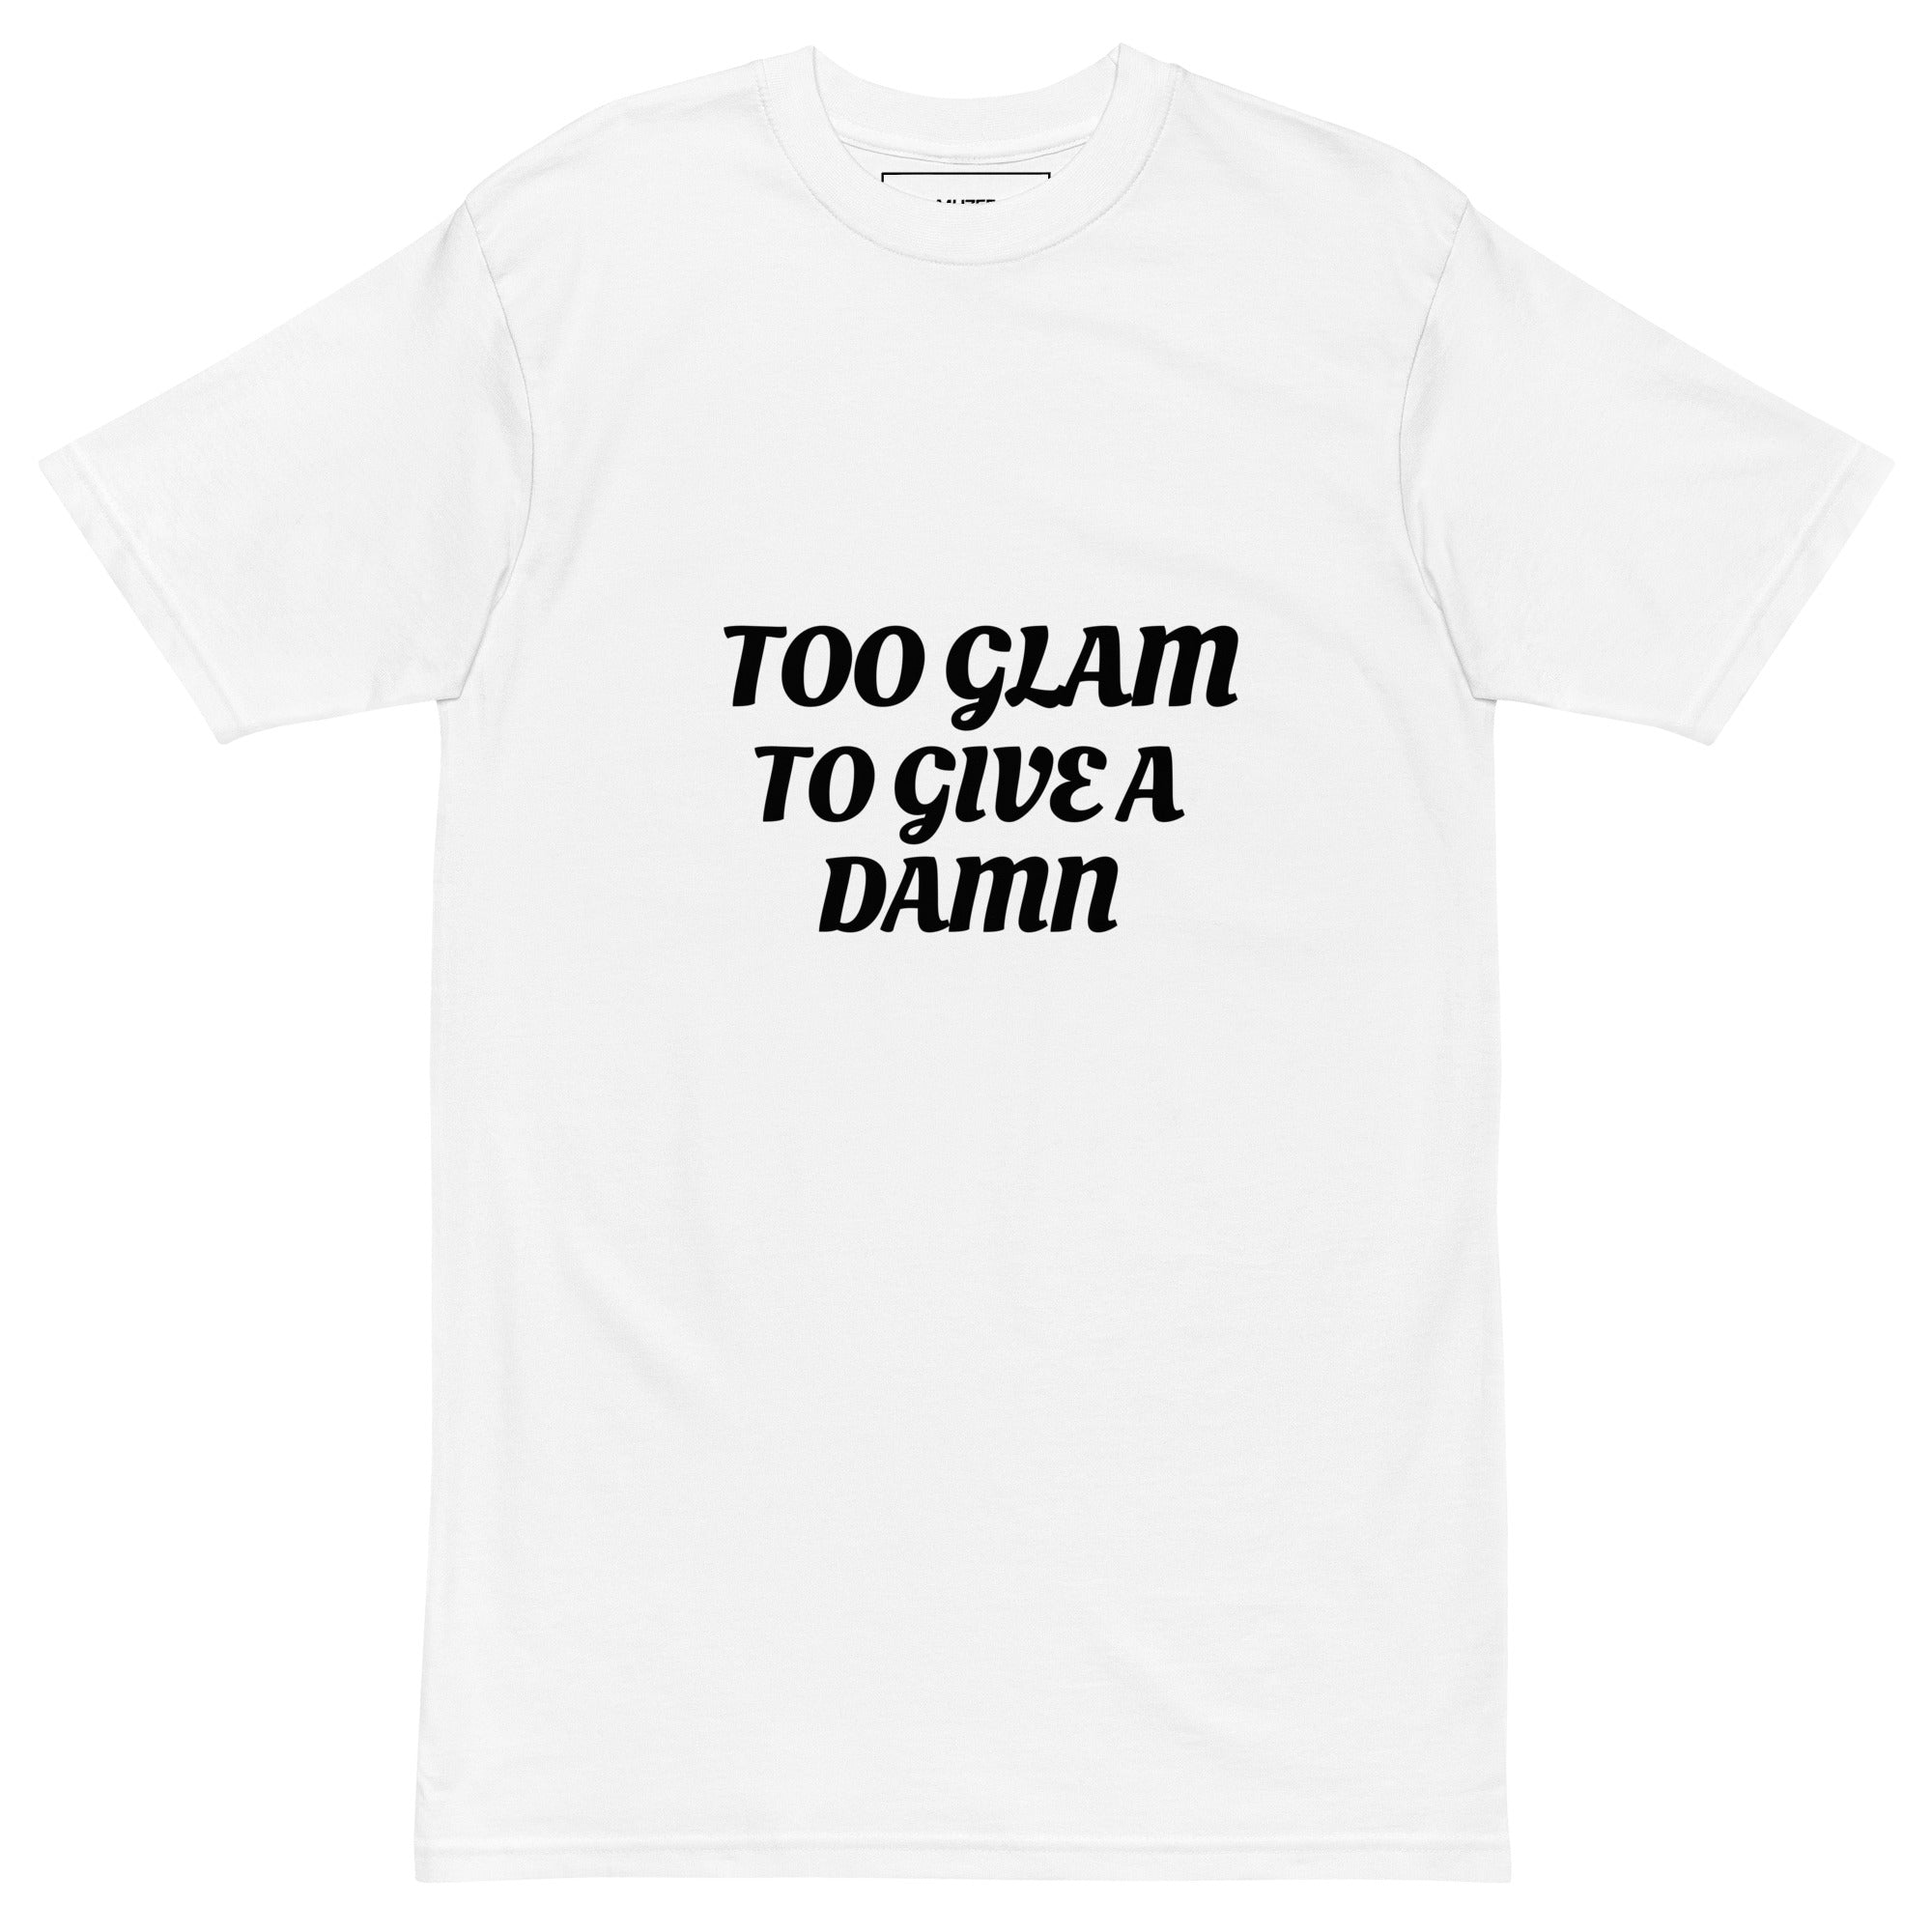 Too Glam To Give a Damn Tee